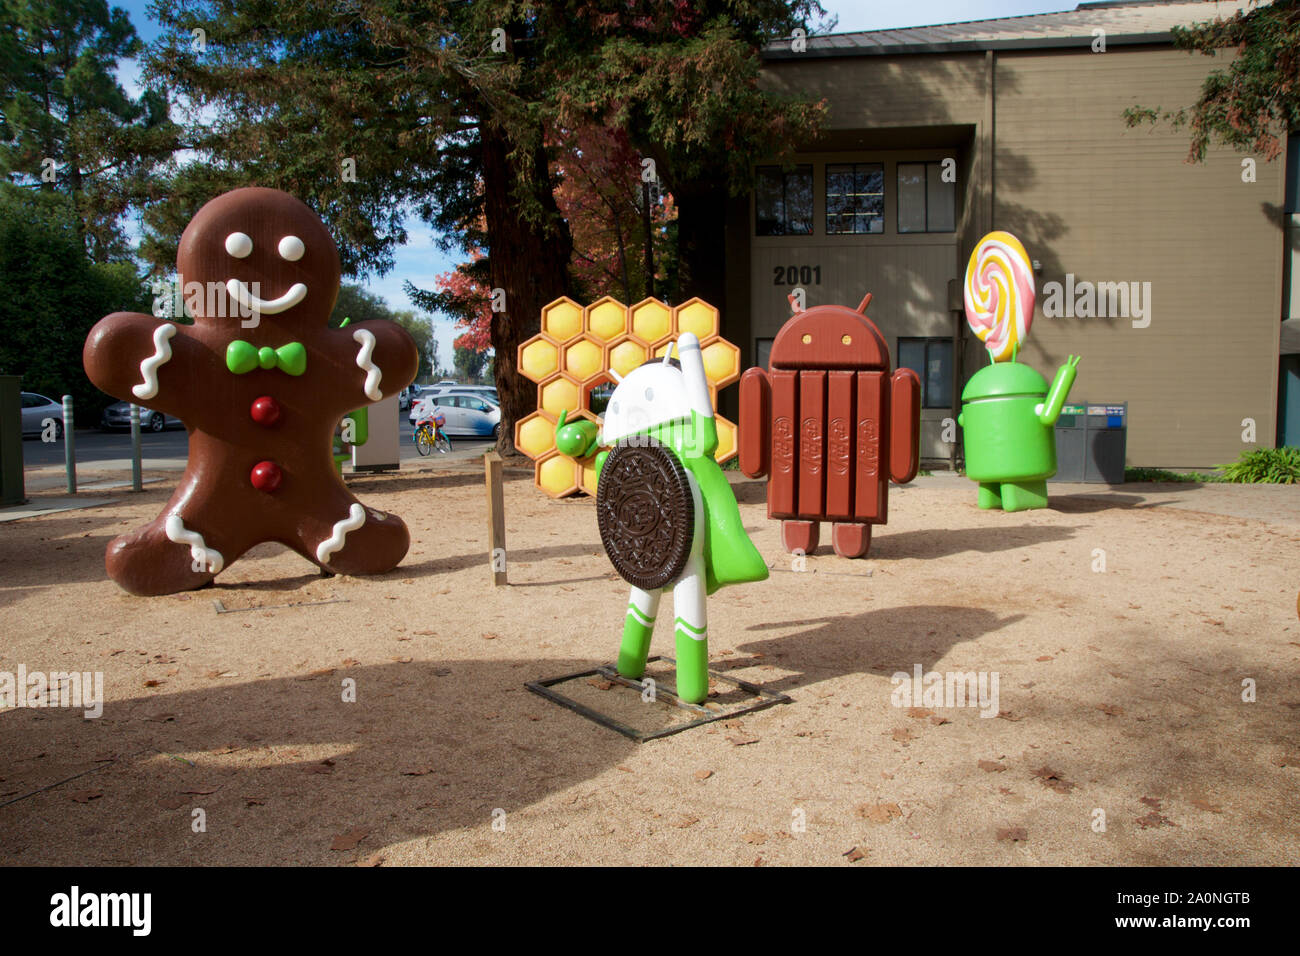 CUPERTINO, CALIFORNIA, UNITED STATES - NOV 26th, 2018: Android lawn statues at Google Visitor Center Beta. The Android lawn statues are a series of Stock Photo